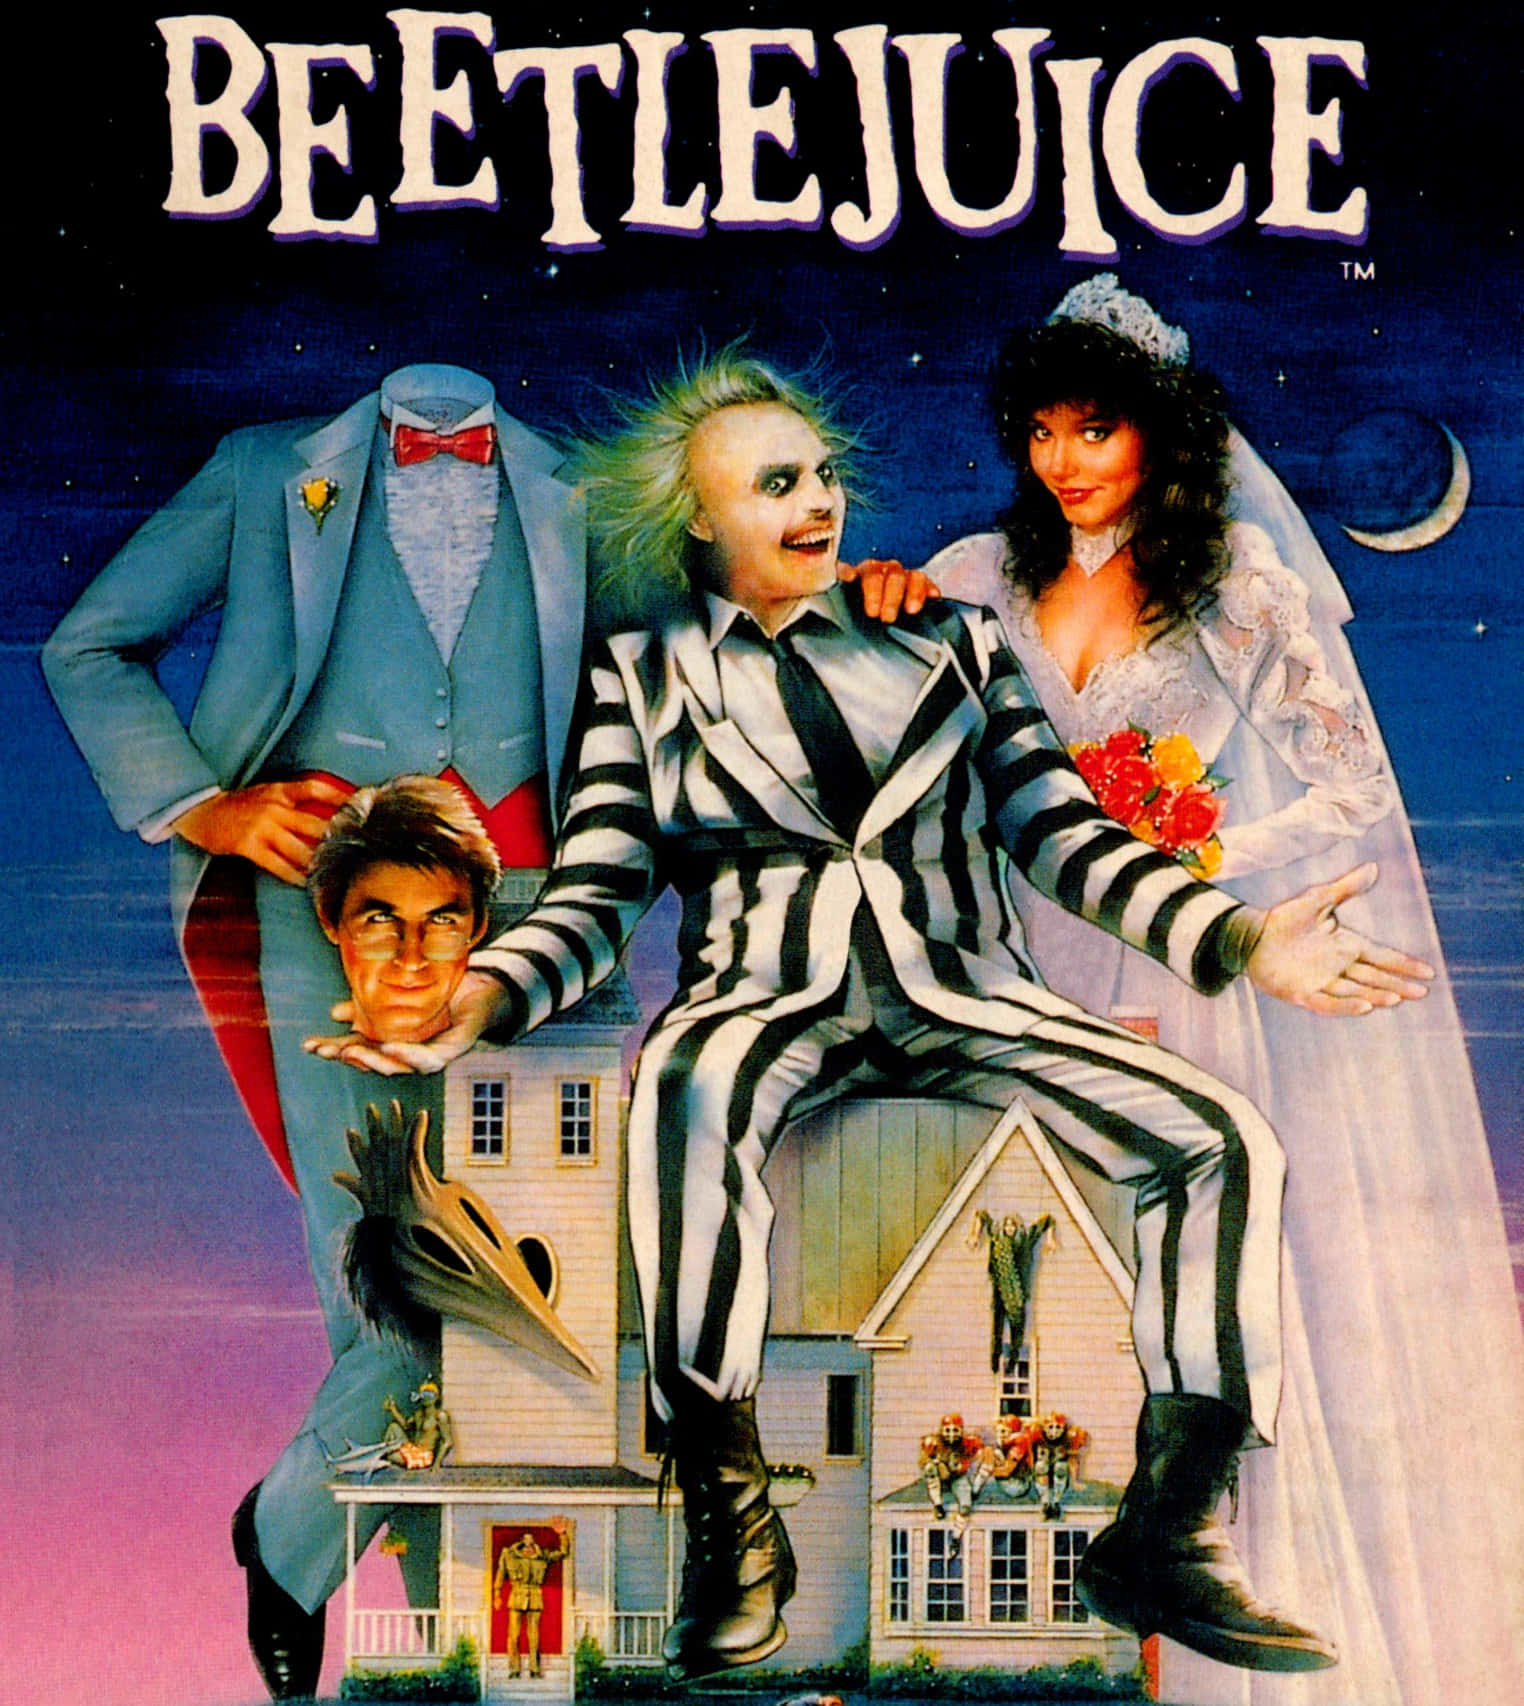 Download The iconic Beetlejuice in a haunting pose. | Wallpapers.com